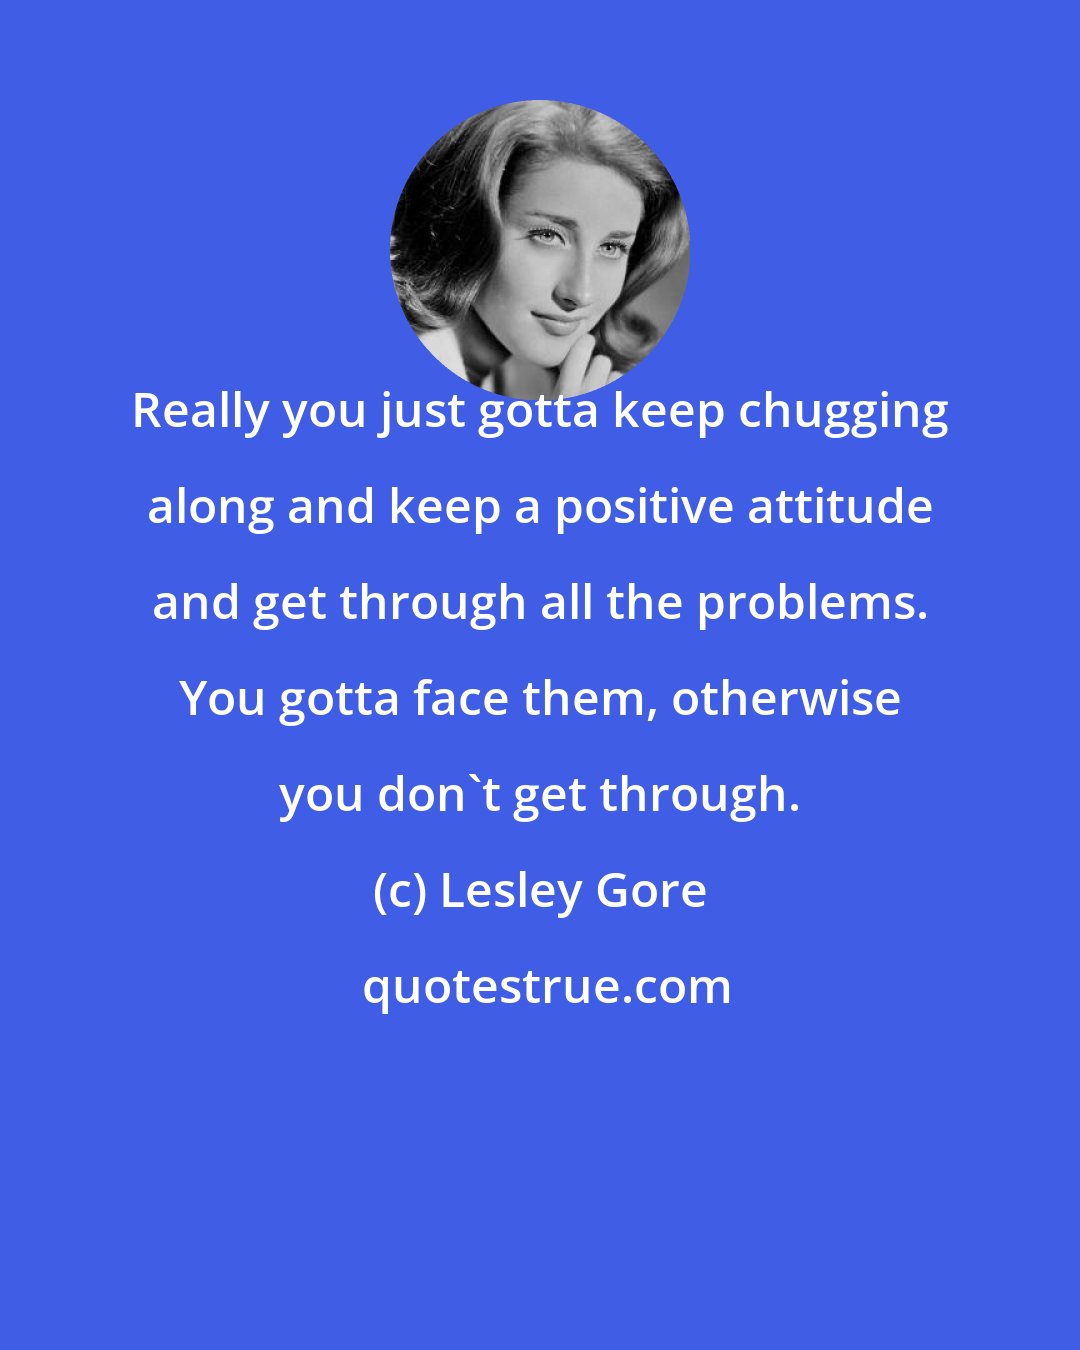 Lesley Gore: Really you just gotta keep chugging along and keep a positive attitude and get through all the problems. You gotta face them, otherwise you don't get through.